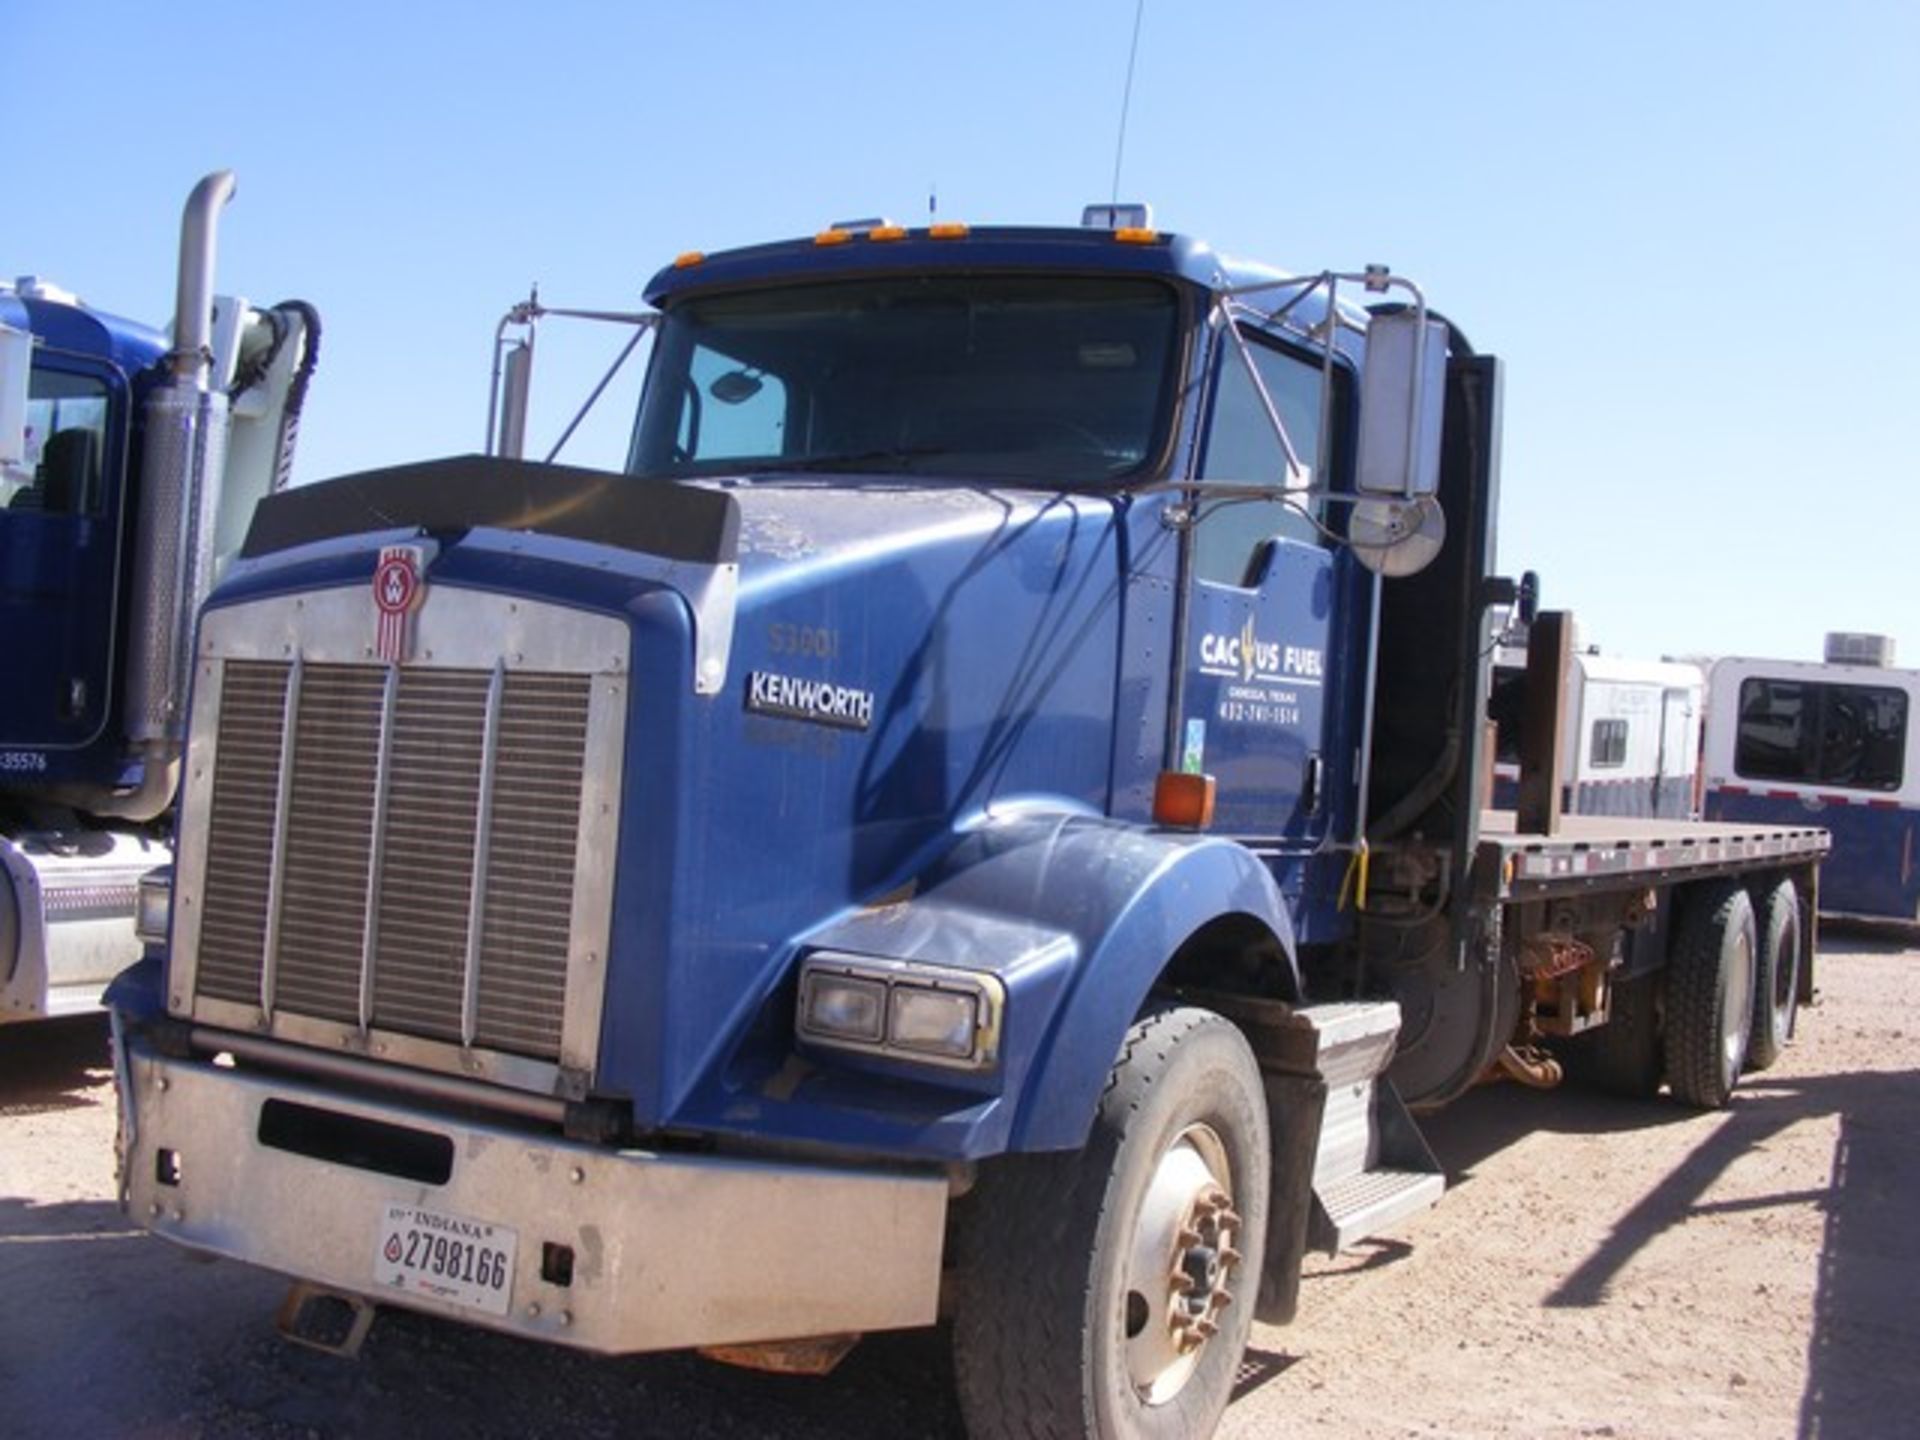 Located in YARD 1 - Midland, TX (6128) (X) 2009 KENWORTH T800, T/A DAY CAB STAKE BED DELIVERY TRUCK,